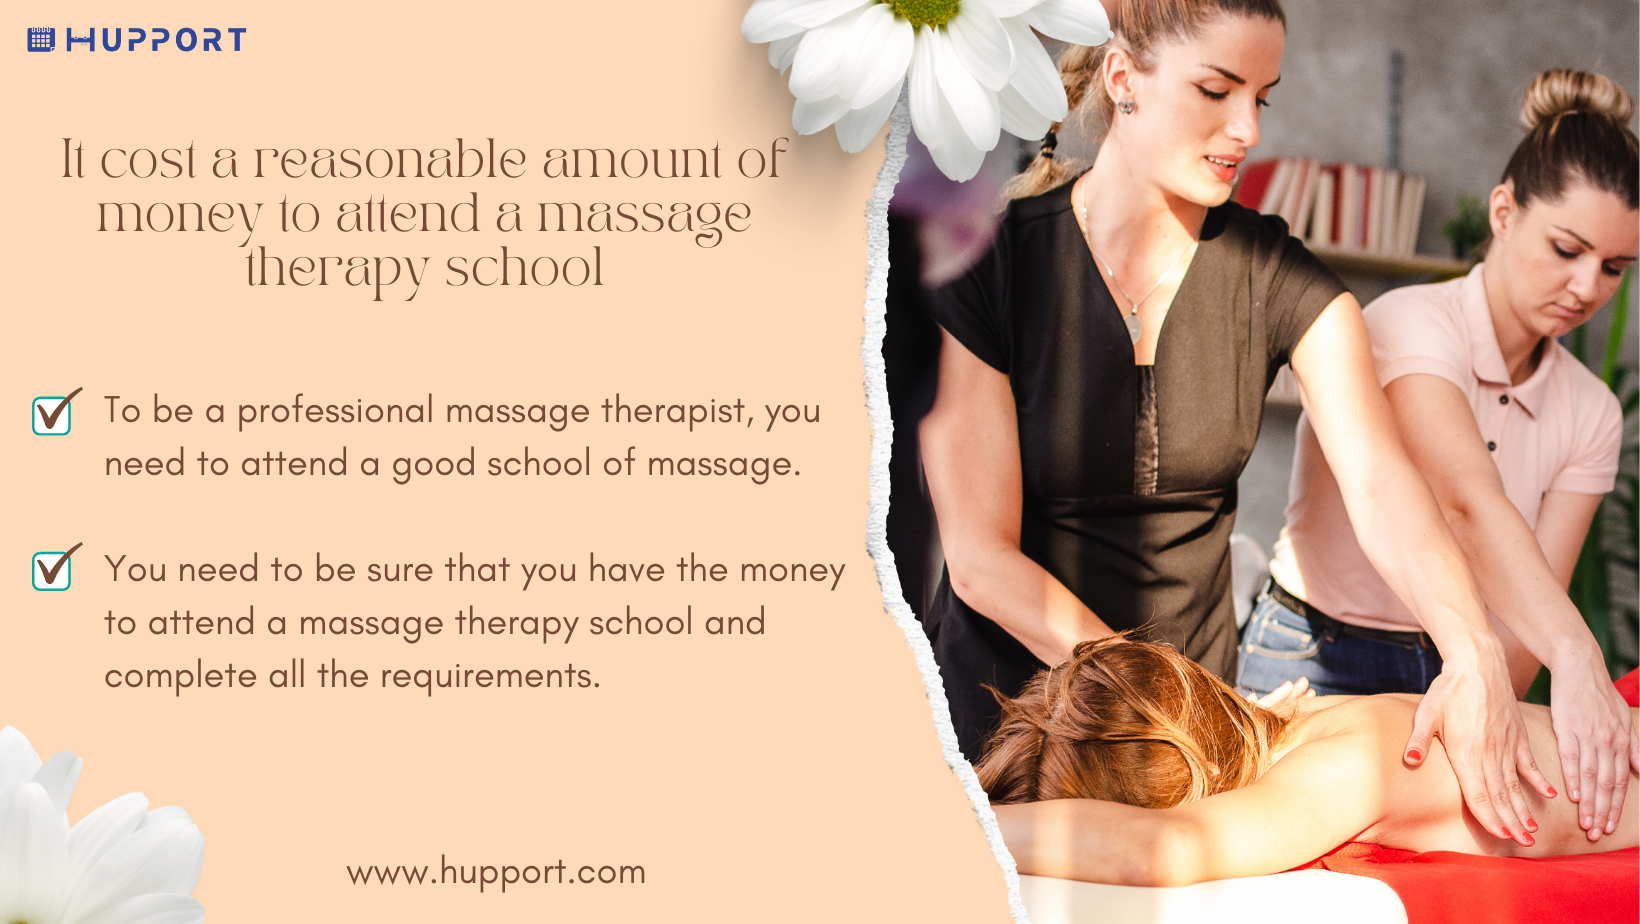 It cost a reasonable amount of money to attend a massage therapy school